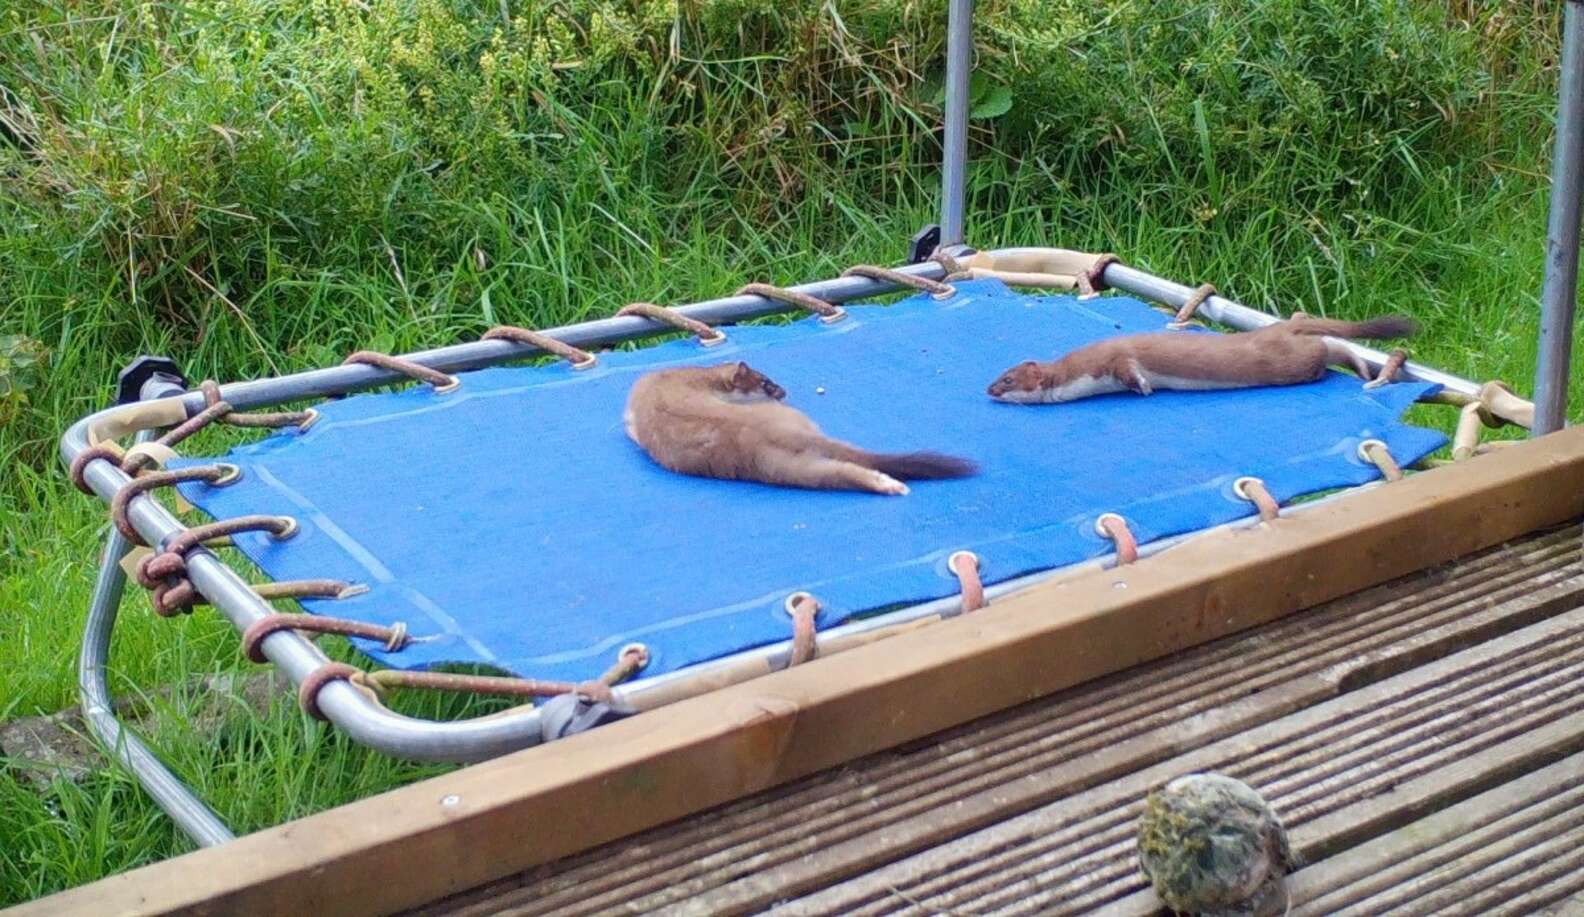 Two little stoats is rubbing their bellies in a blue trampoline